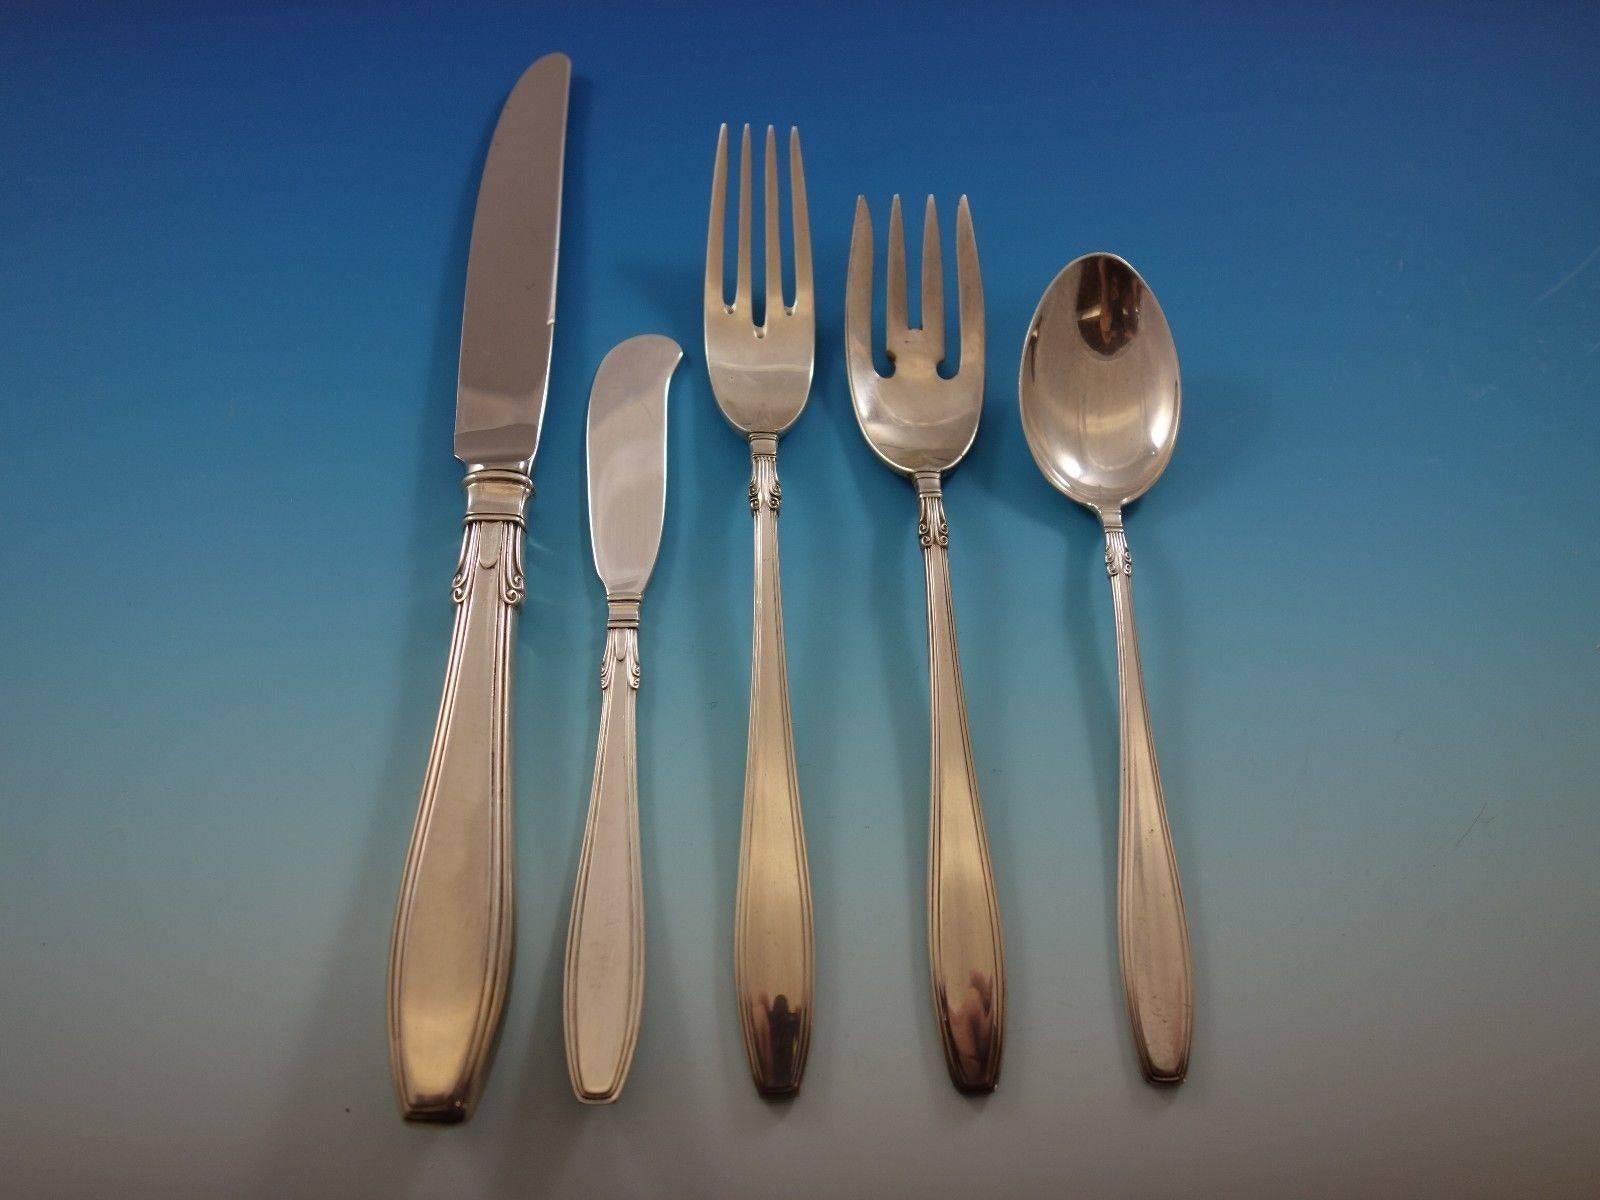 Nocturne by Gorham sterling silver flatware set of 245 pieces. This set includes: 
48 knives, 8 7/8